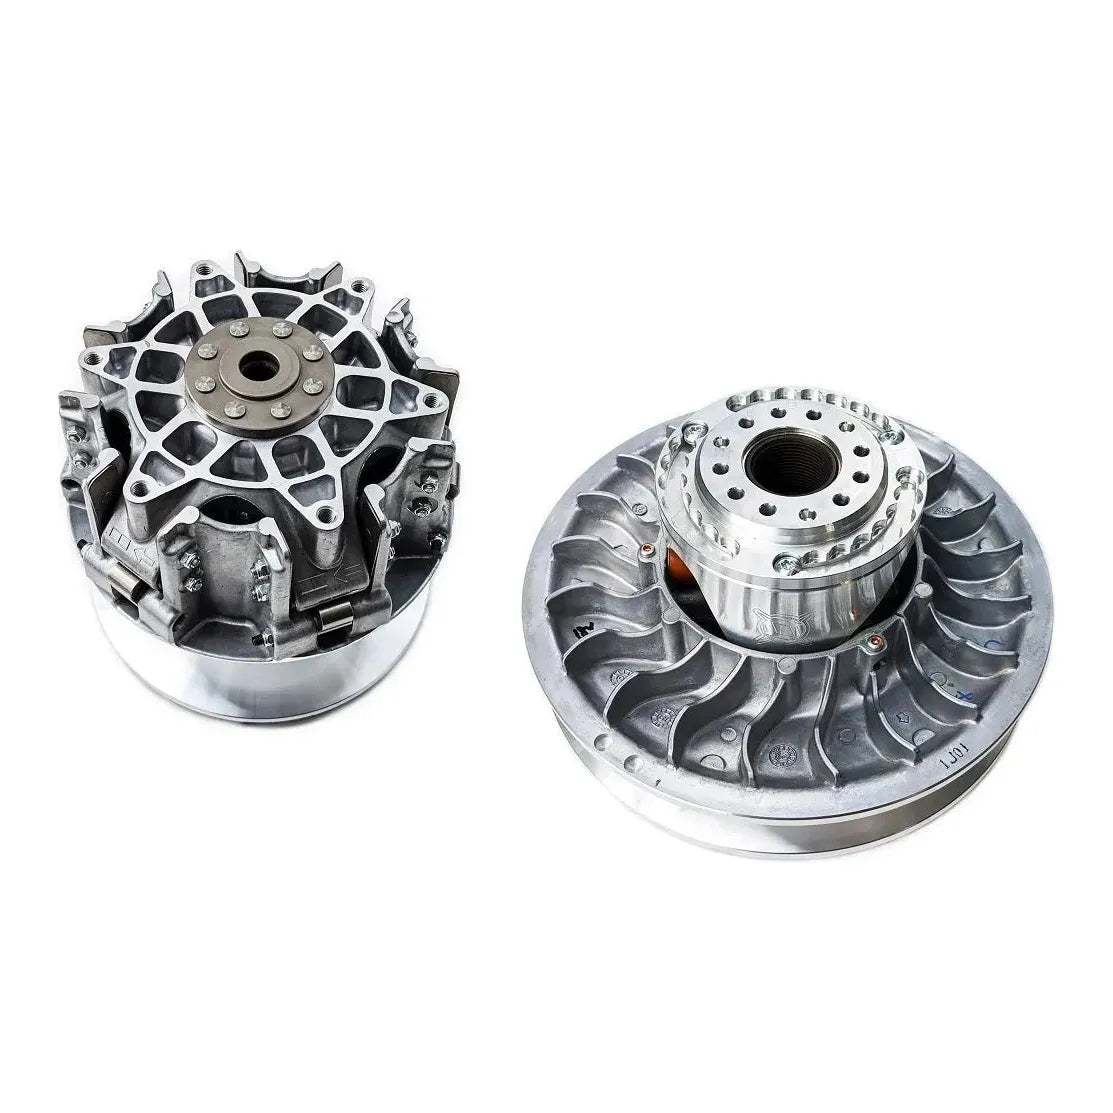 Can Am X3 Stage 4 Clutch Kit with Heavy Duty Primary & Secondary | Aftermarket Assassins